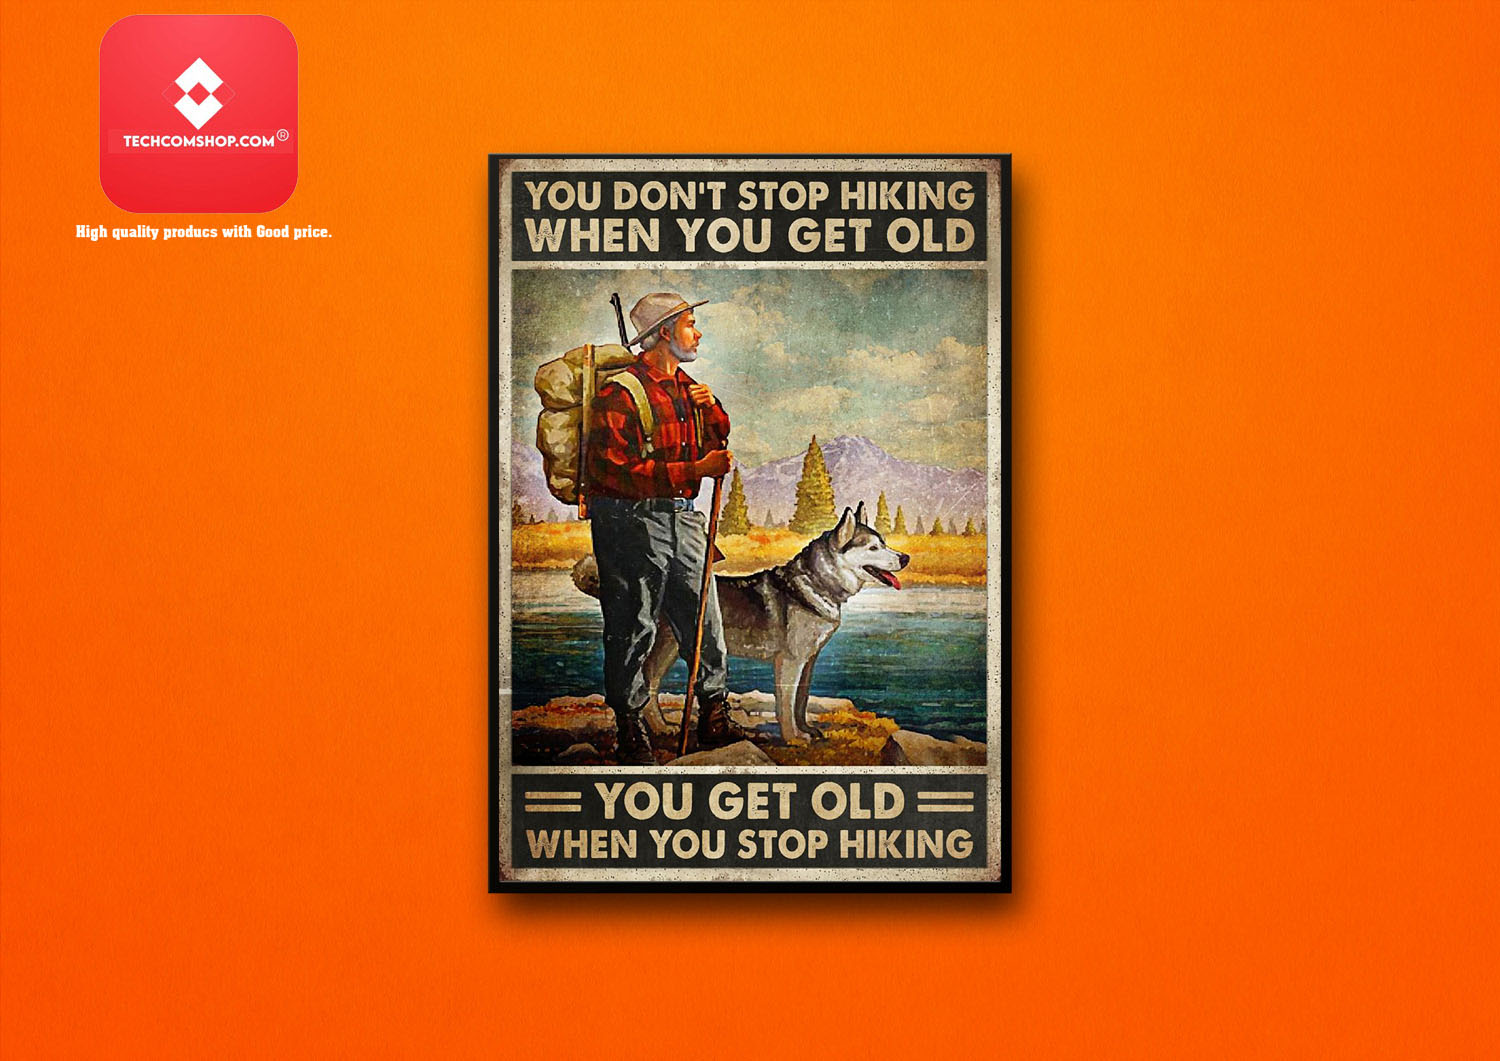 You don’t stop hiking when you get old poster